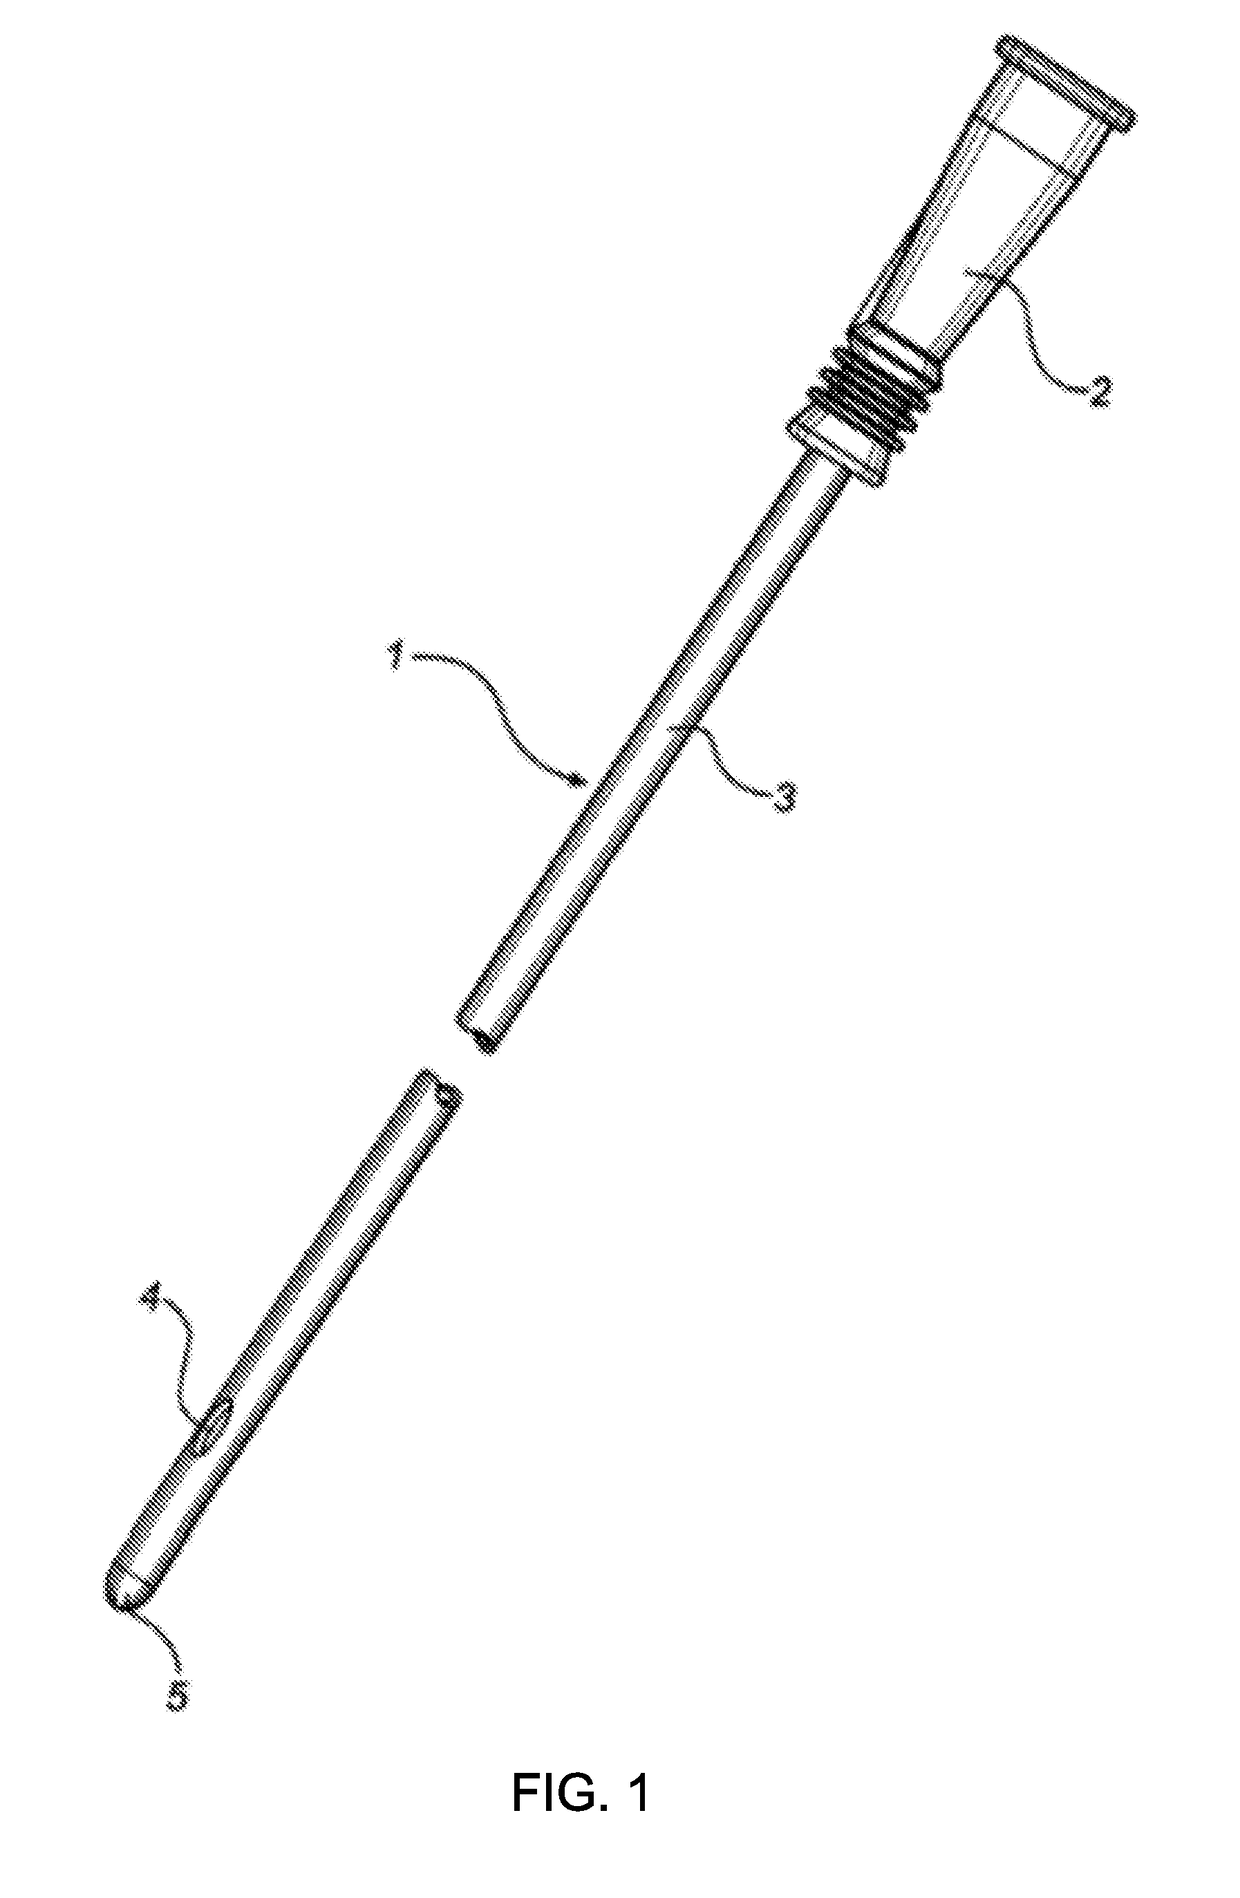 Urinary catheter with varying properties